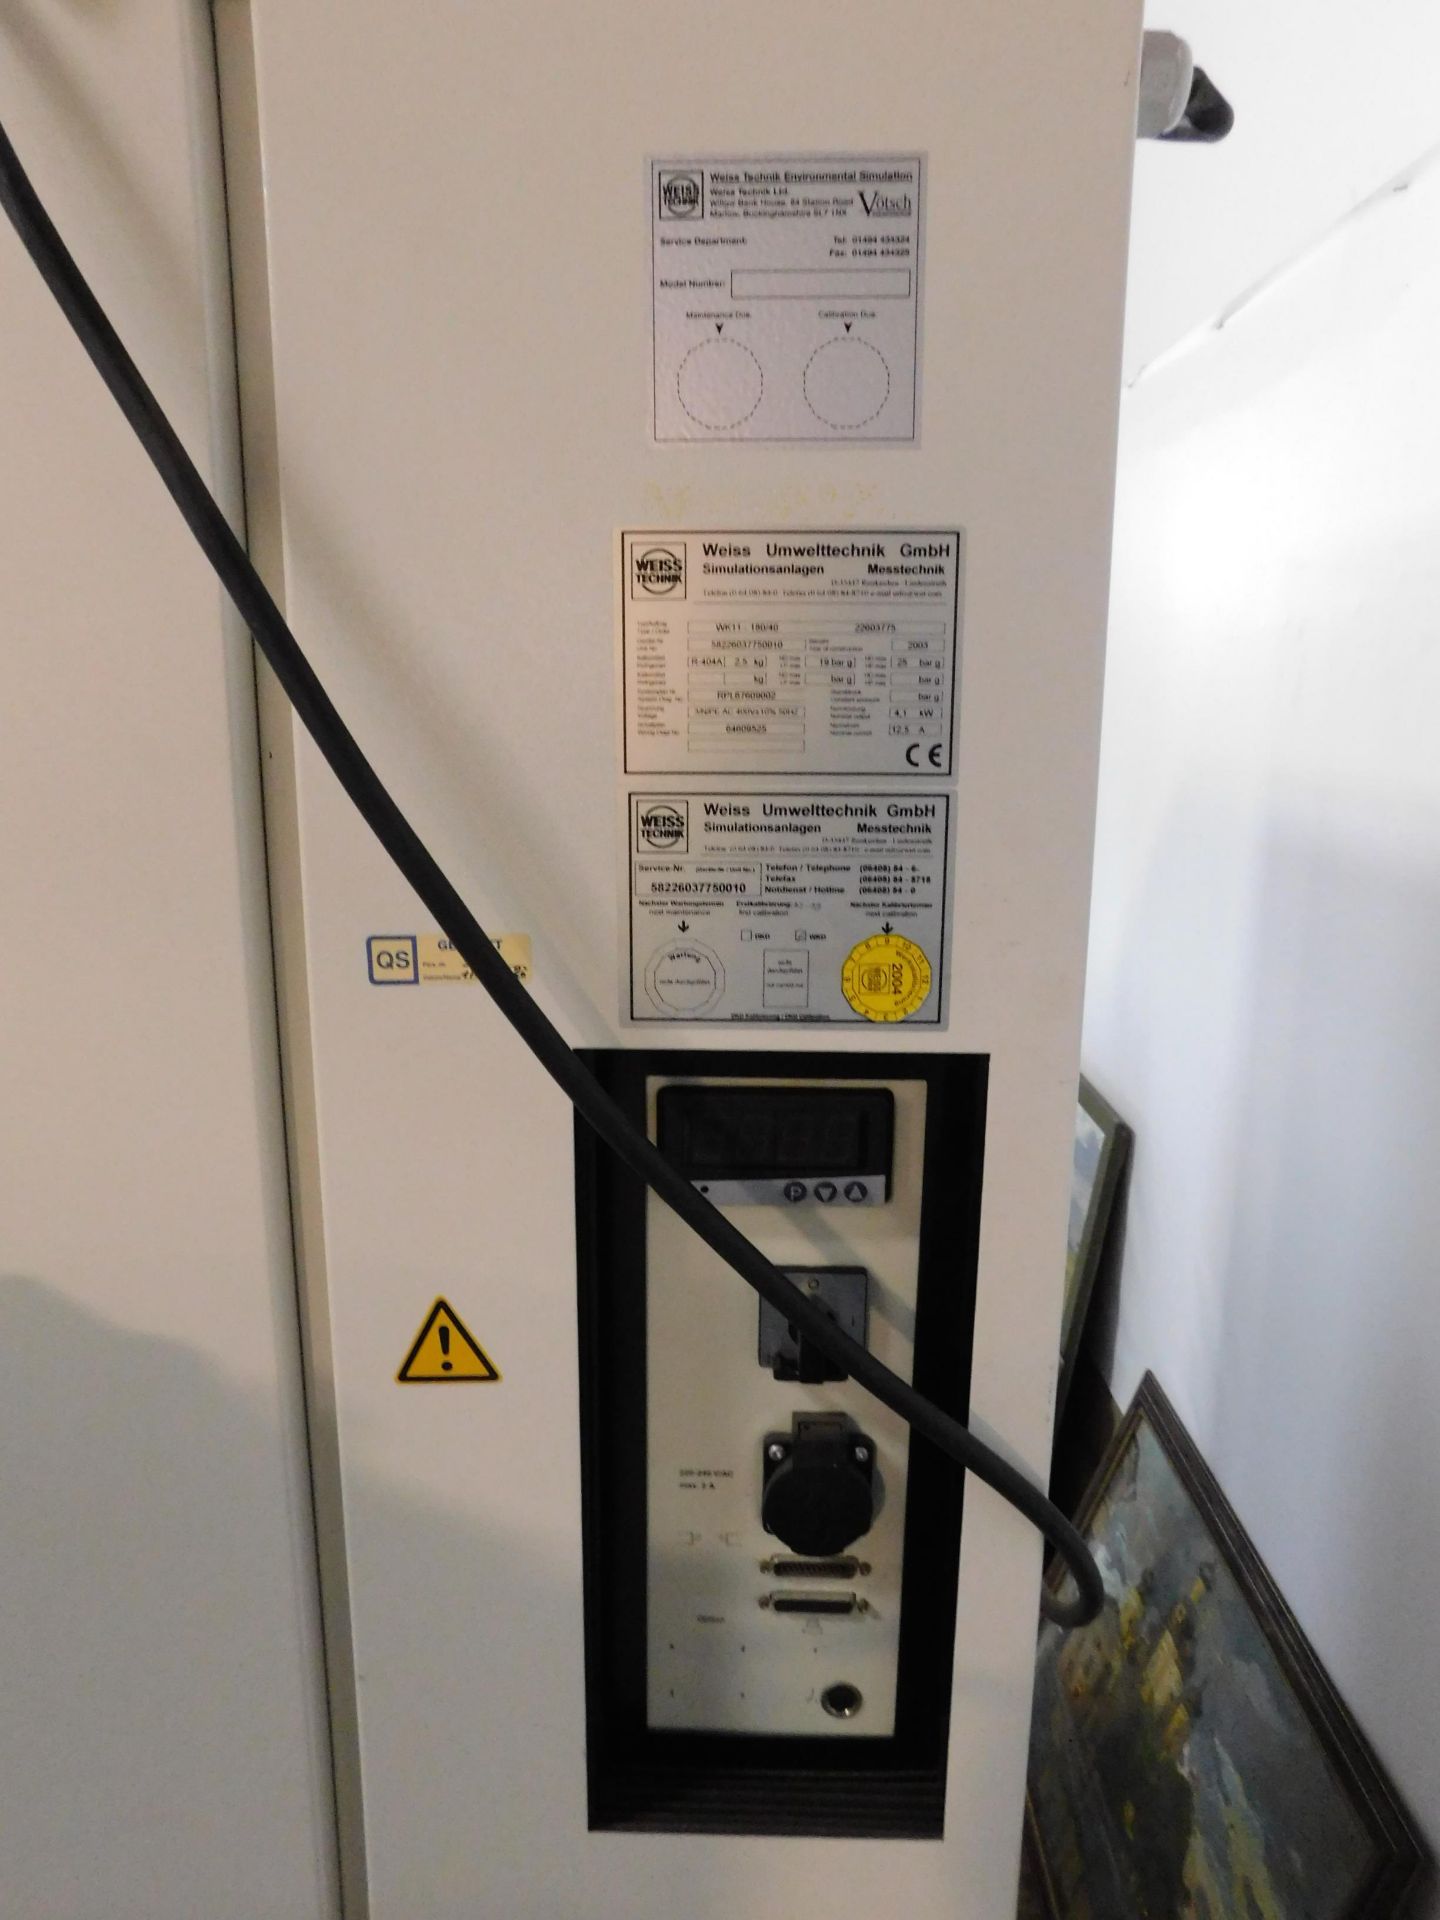 Weiss WK11 180 Environmental Test Chamber (2003), Serial number 58226037750010, Weiss WK11 – 180/40 - Image 9 of 13